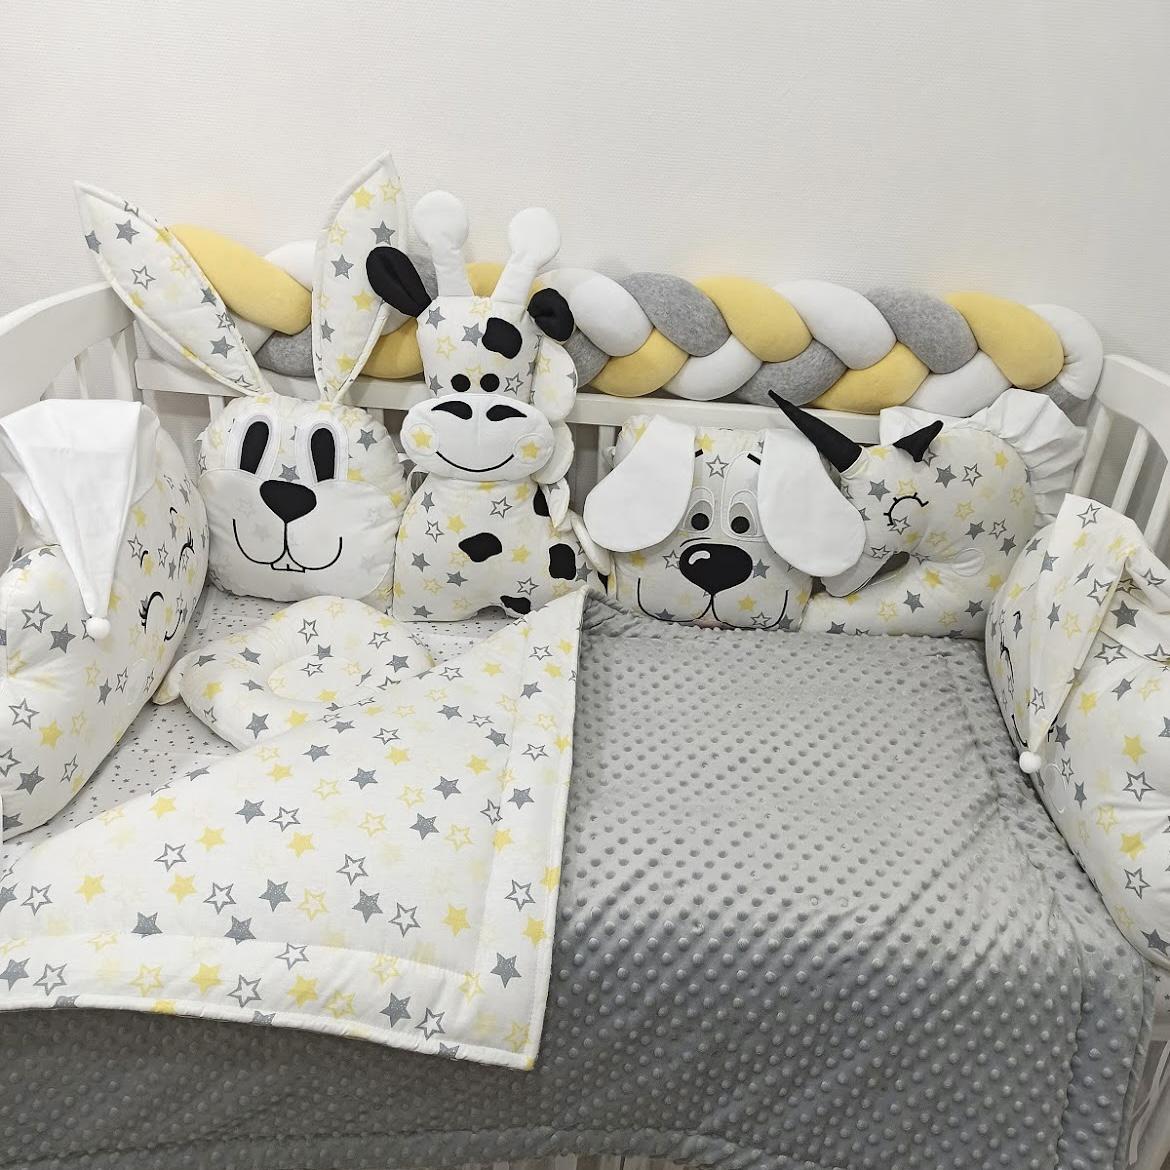 Set of character cushions with yellow and gray stars